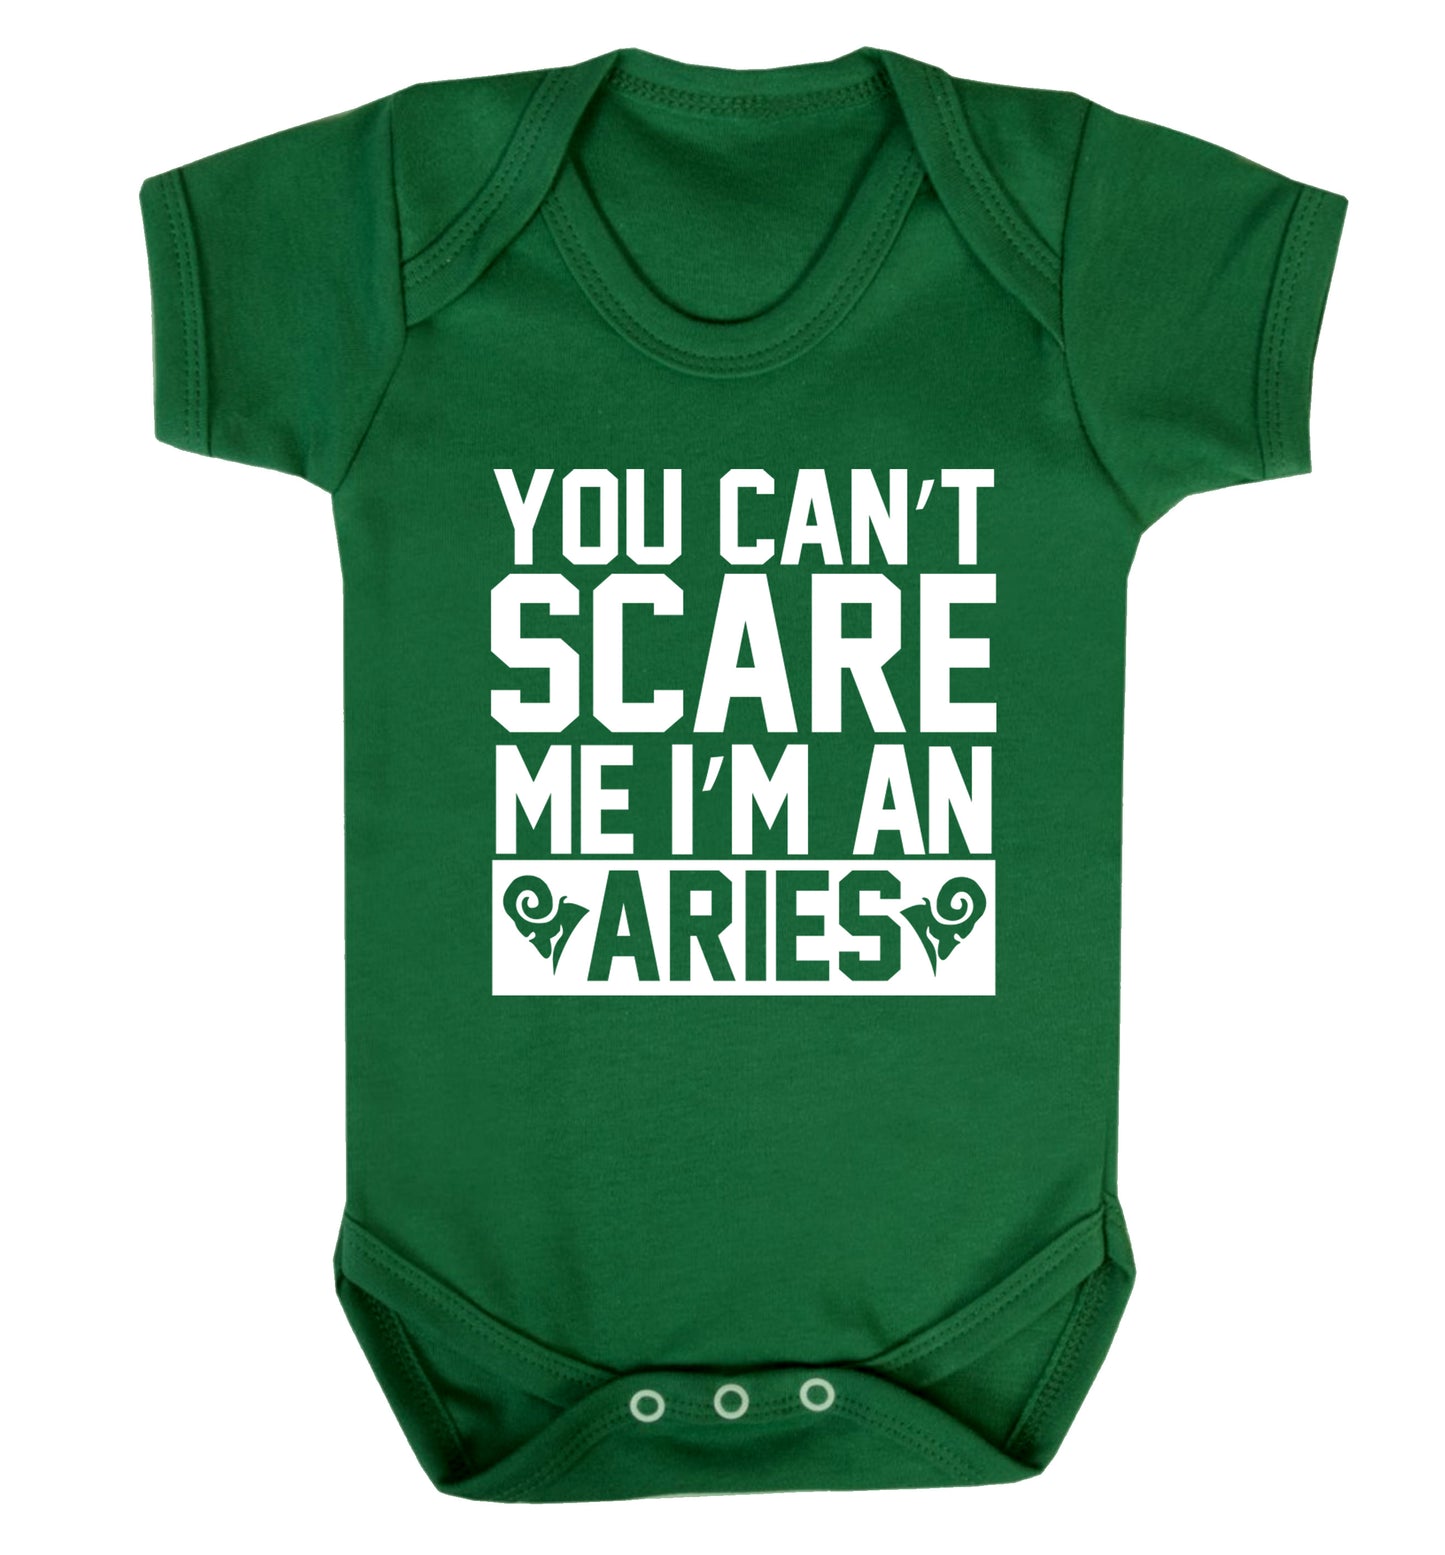 You can't scare me I'm an aries Baby Vest green 18-24 months